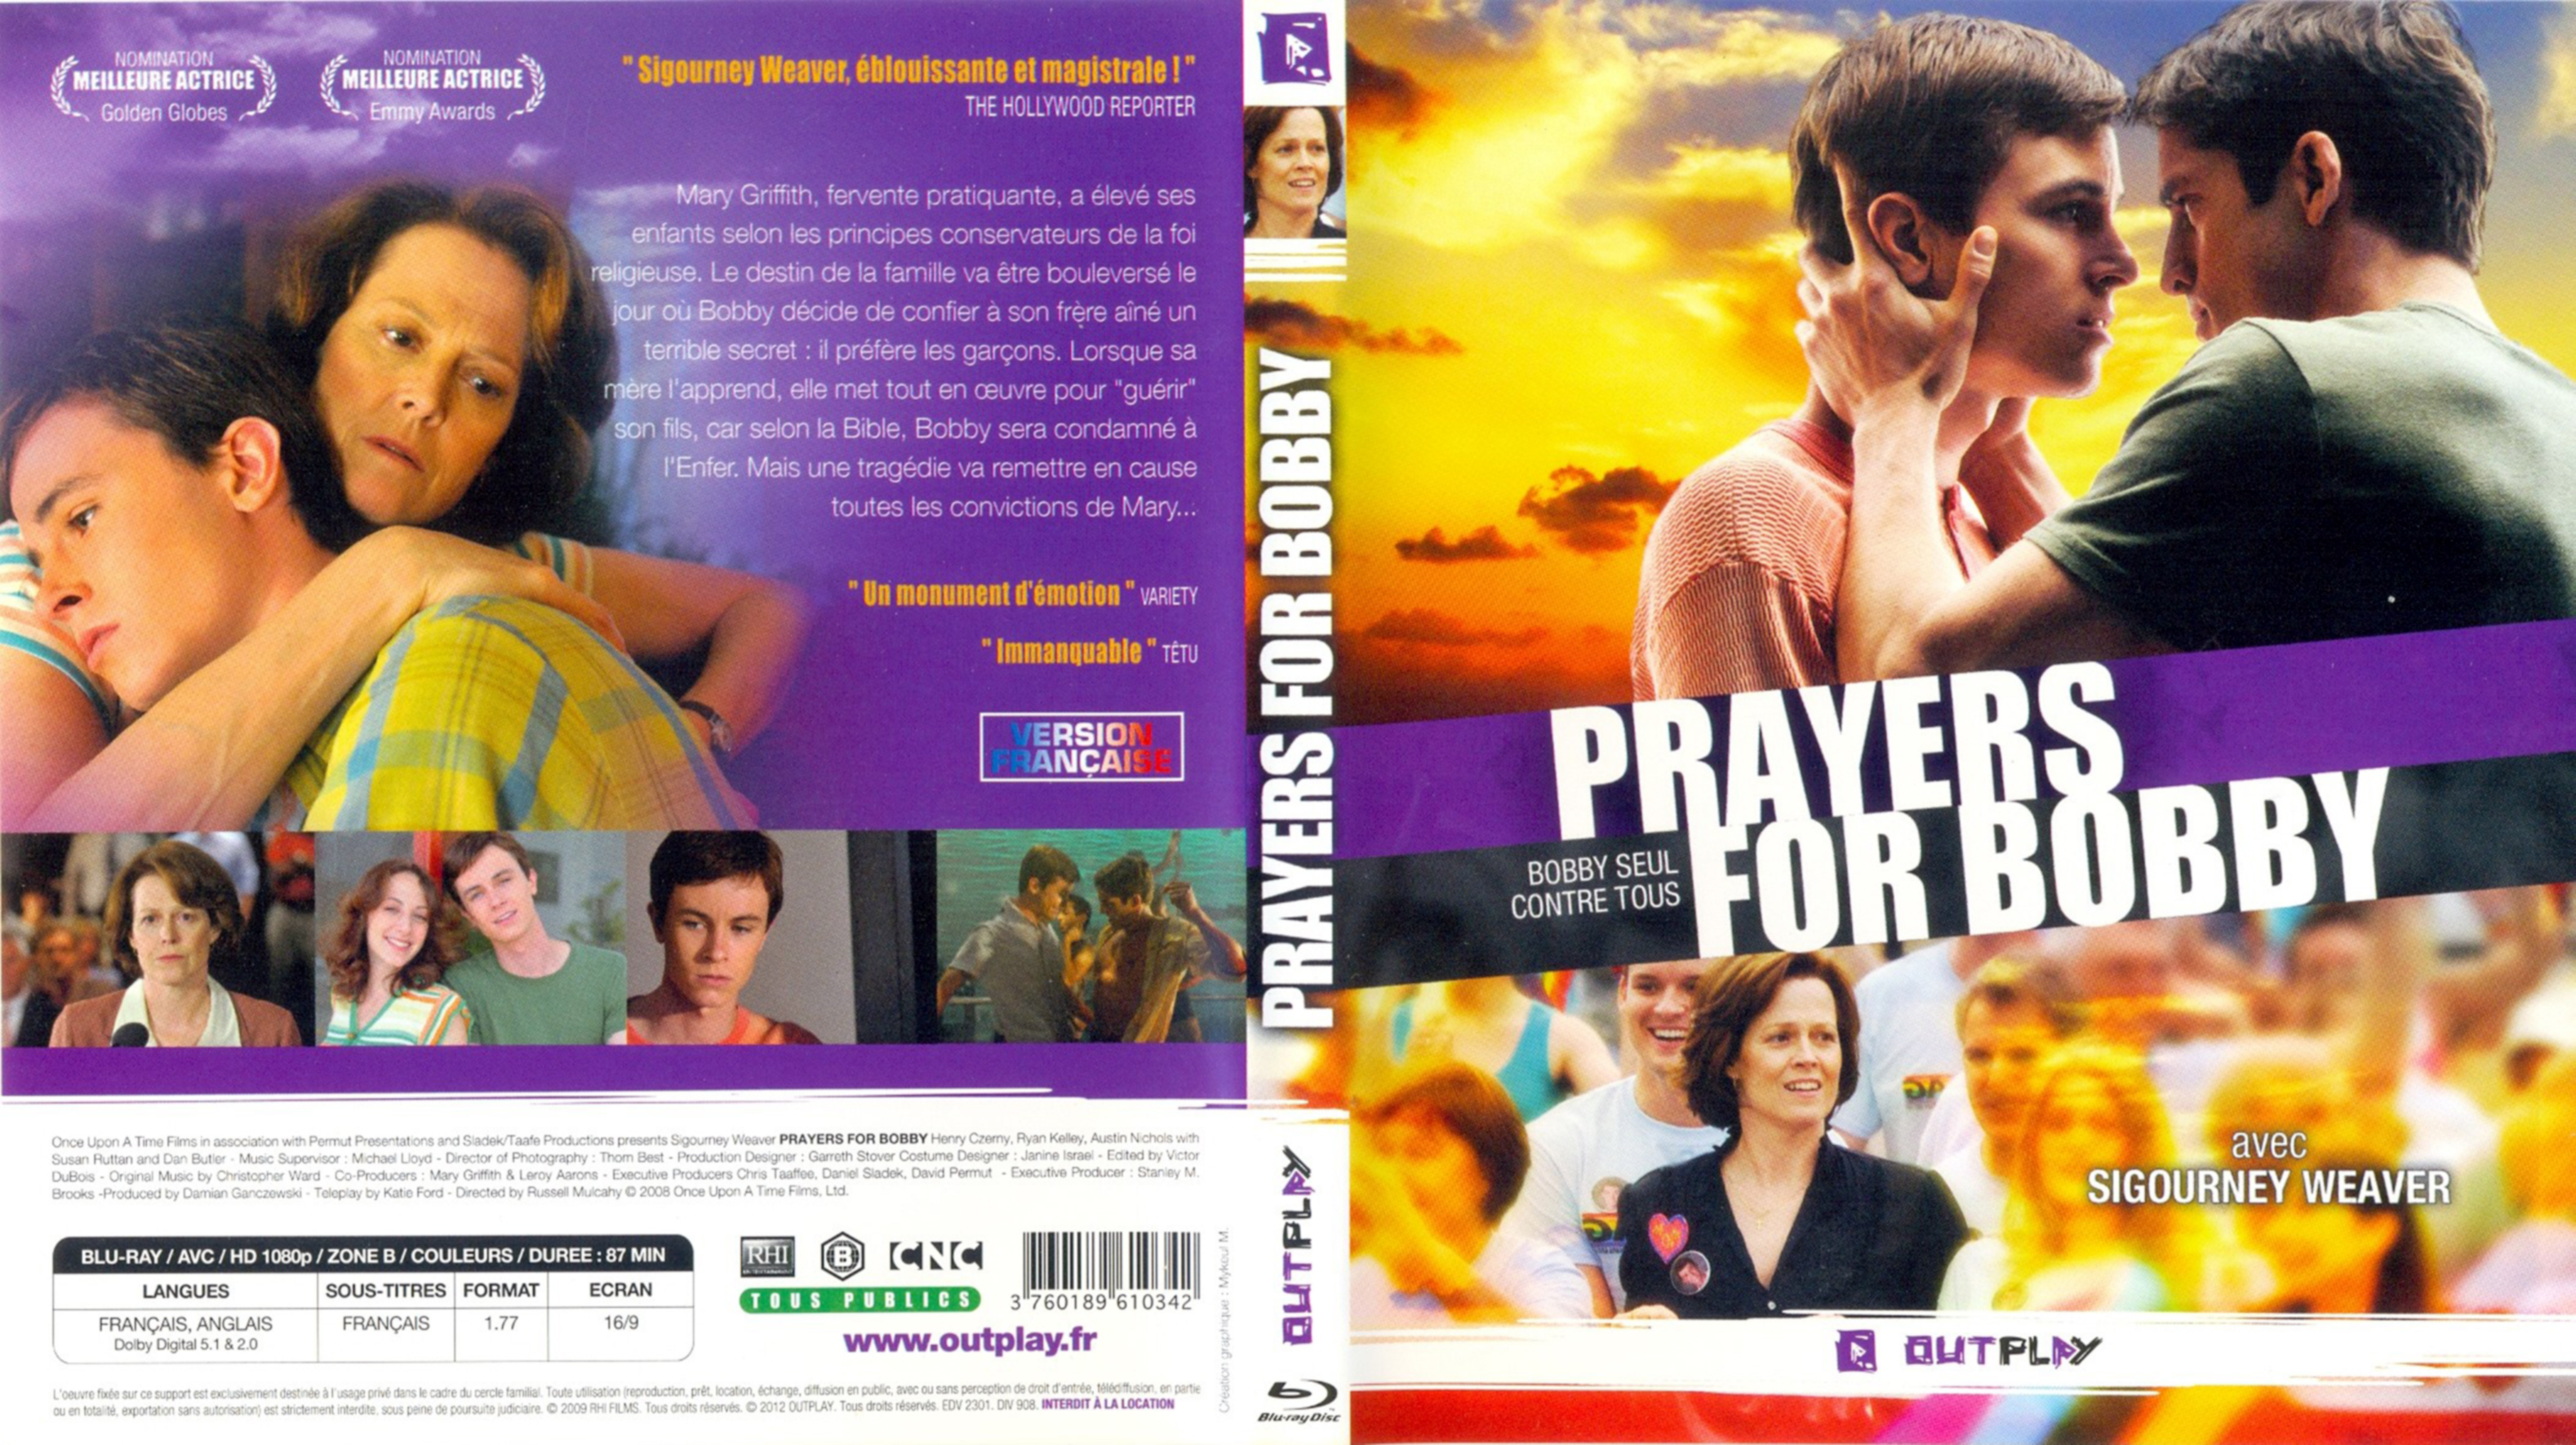 Jaquette DVD Prayers for Bobby (BLU-RAY)